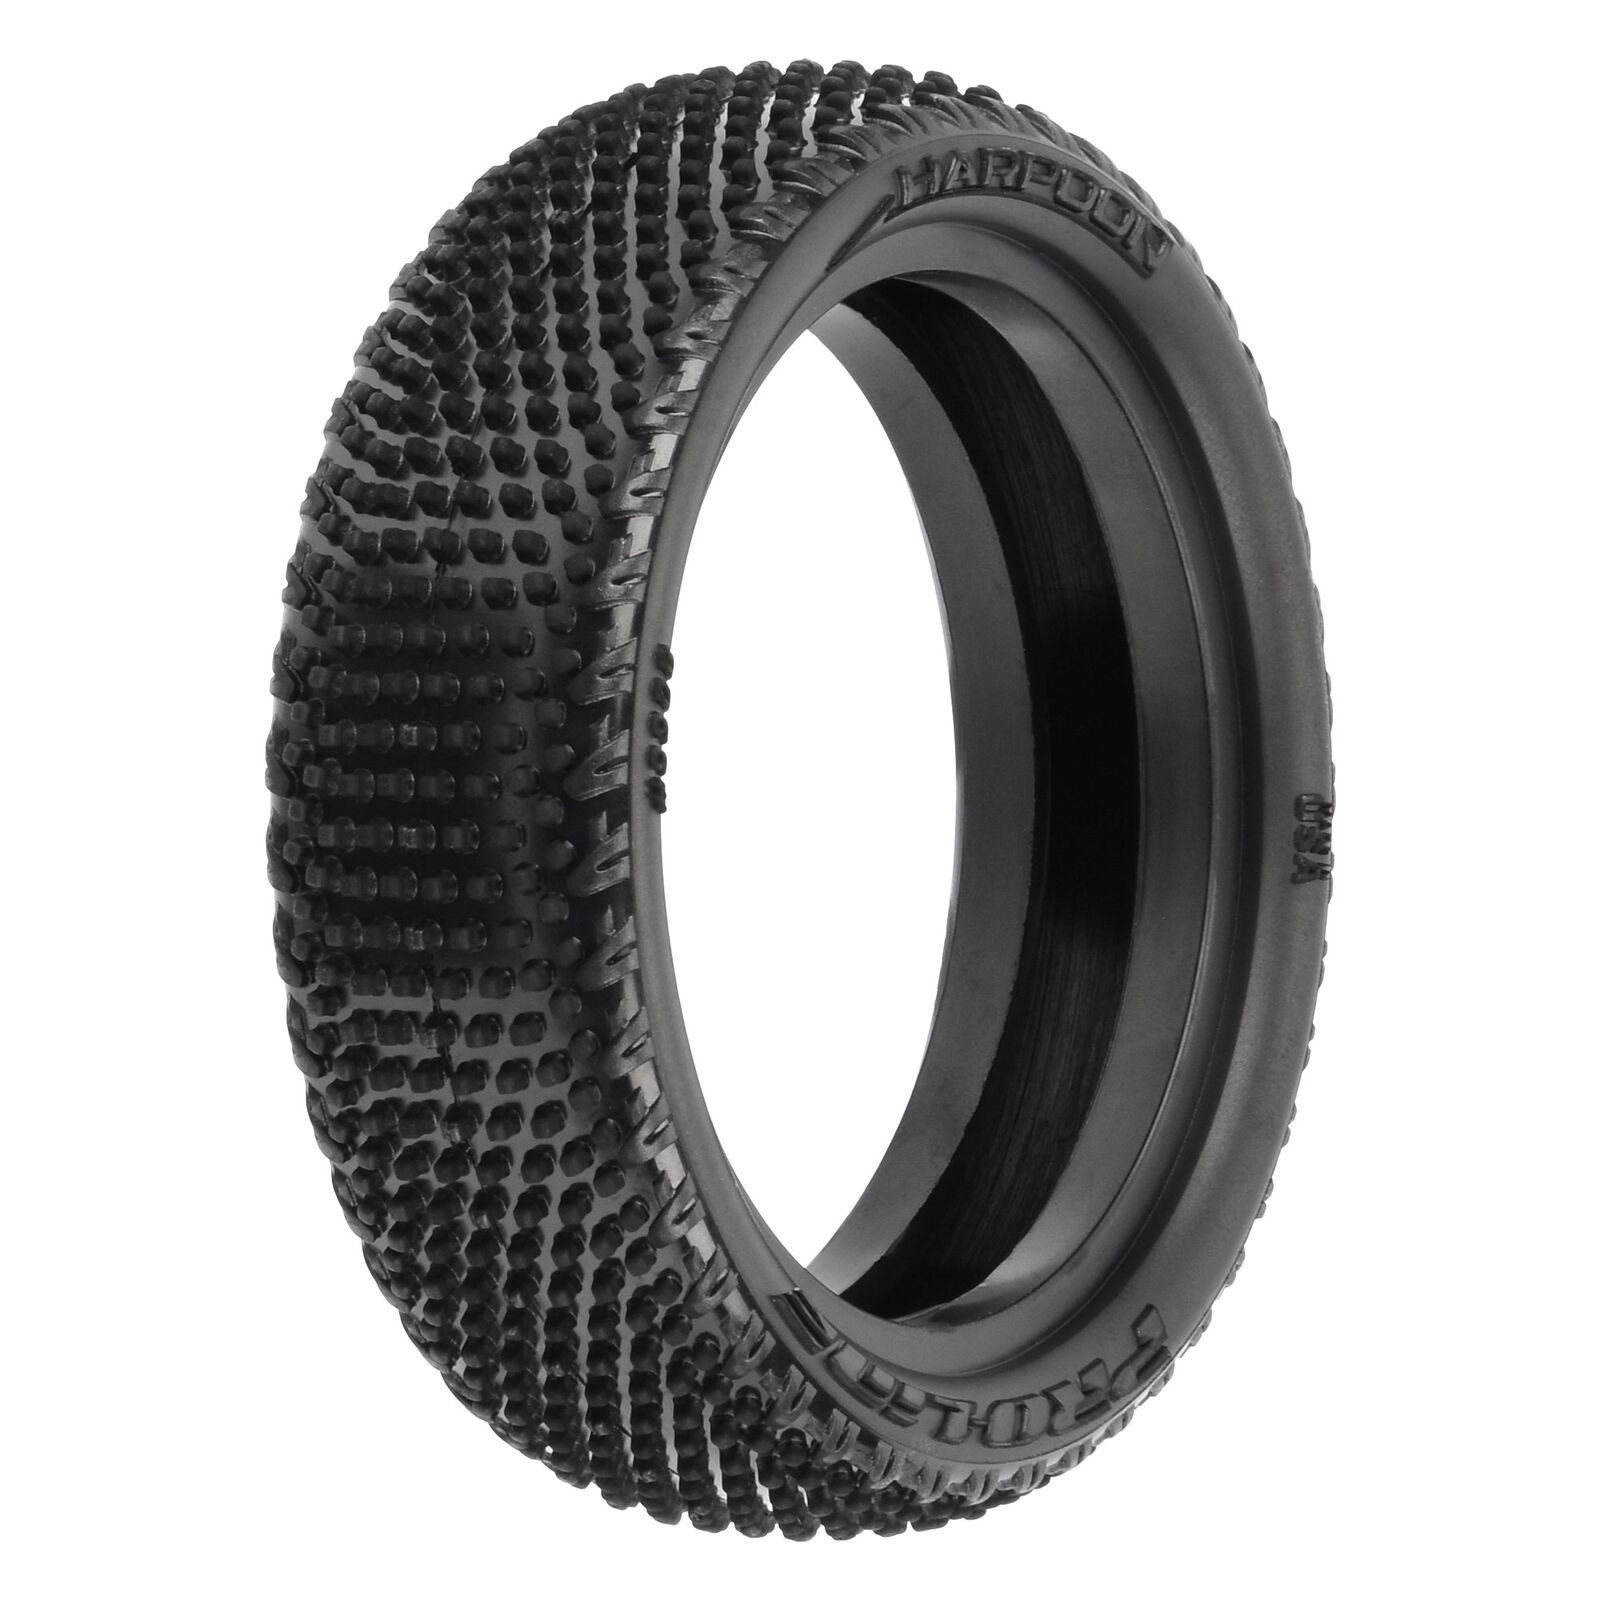 RC Car Action - RC Cars & Trucks | Pro-Line Harpoon 1/10 Off-Road Buggy Carpet Tires